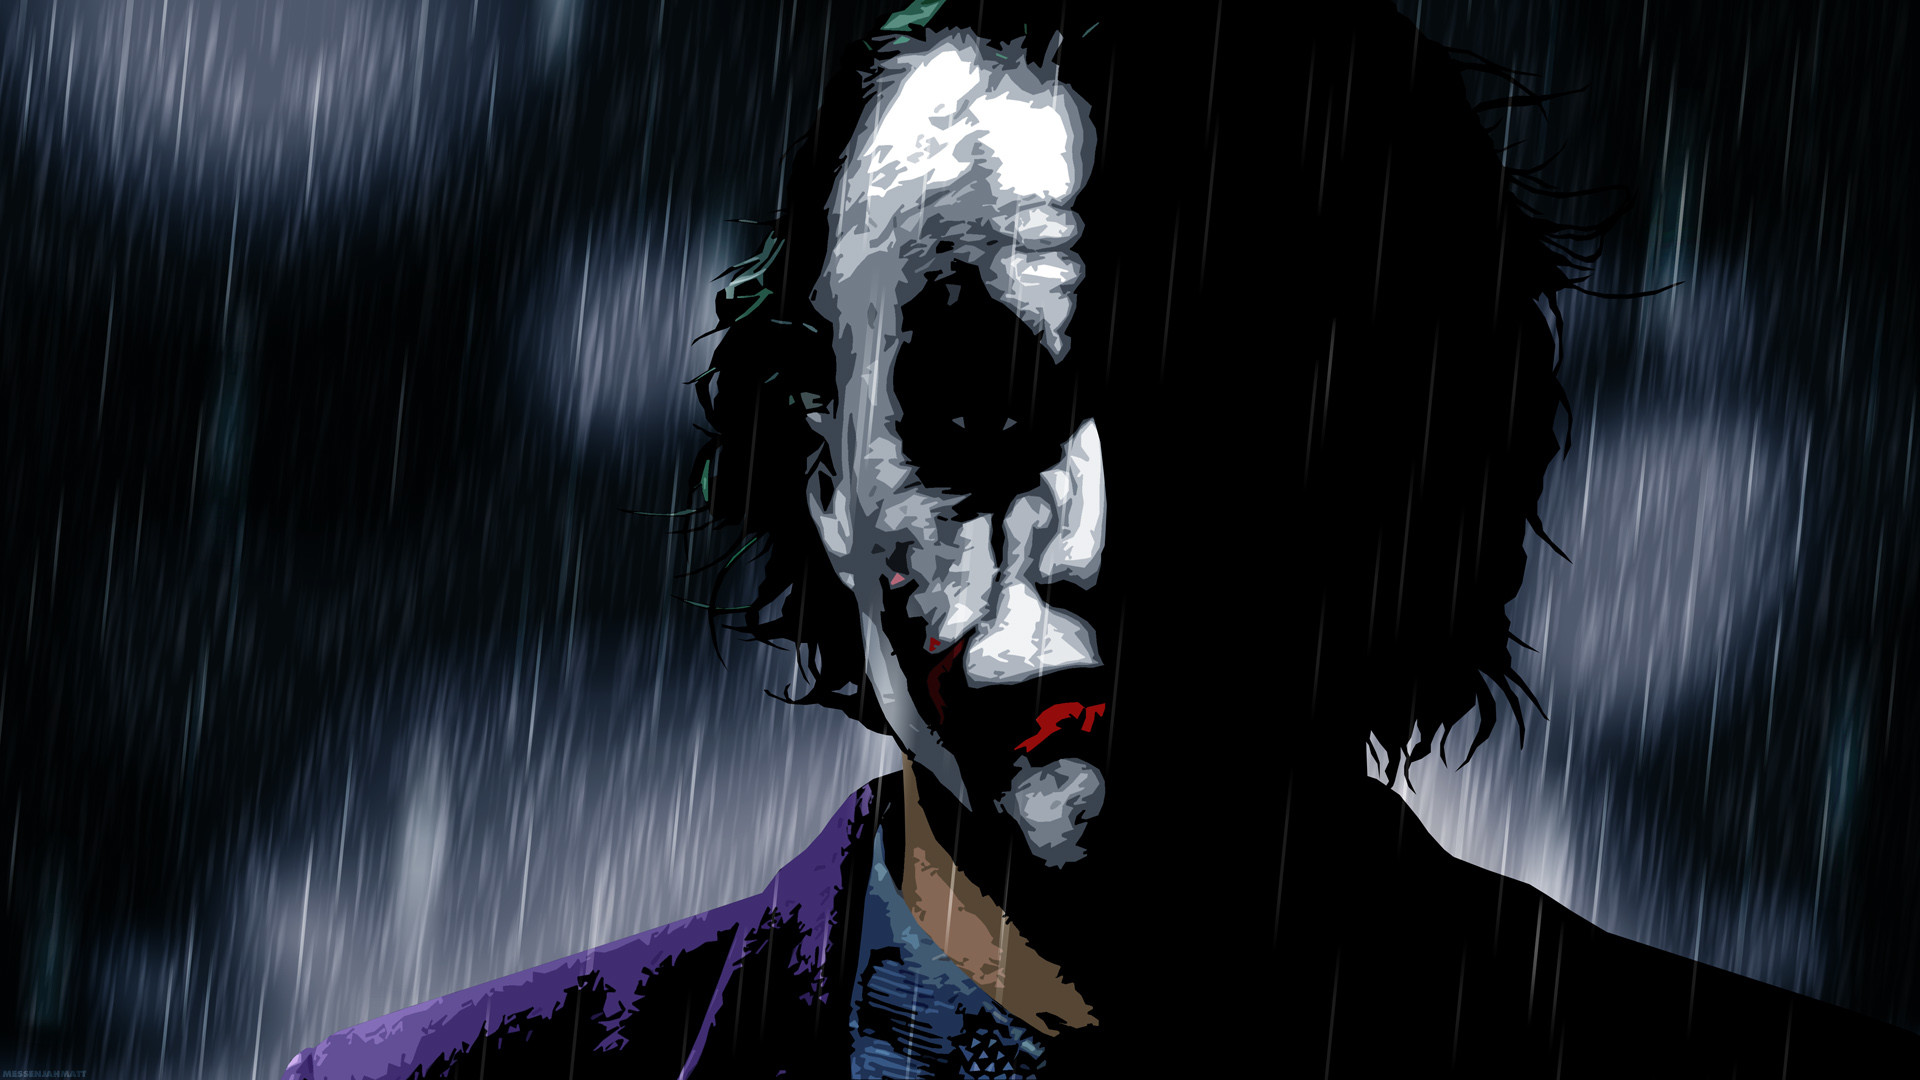 1920x1080 High Definition The Joker, by Pax Cantrill